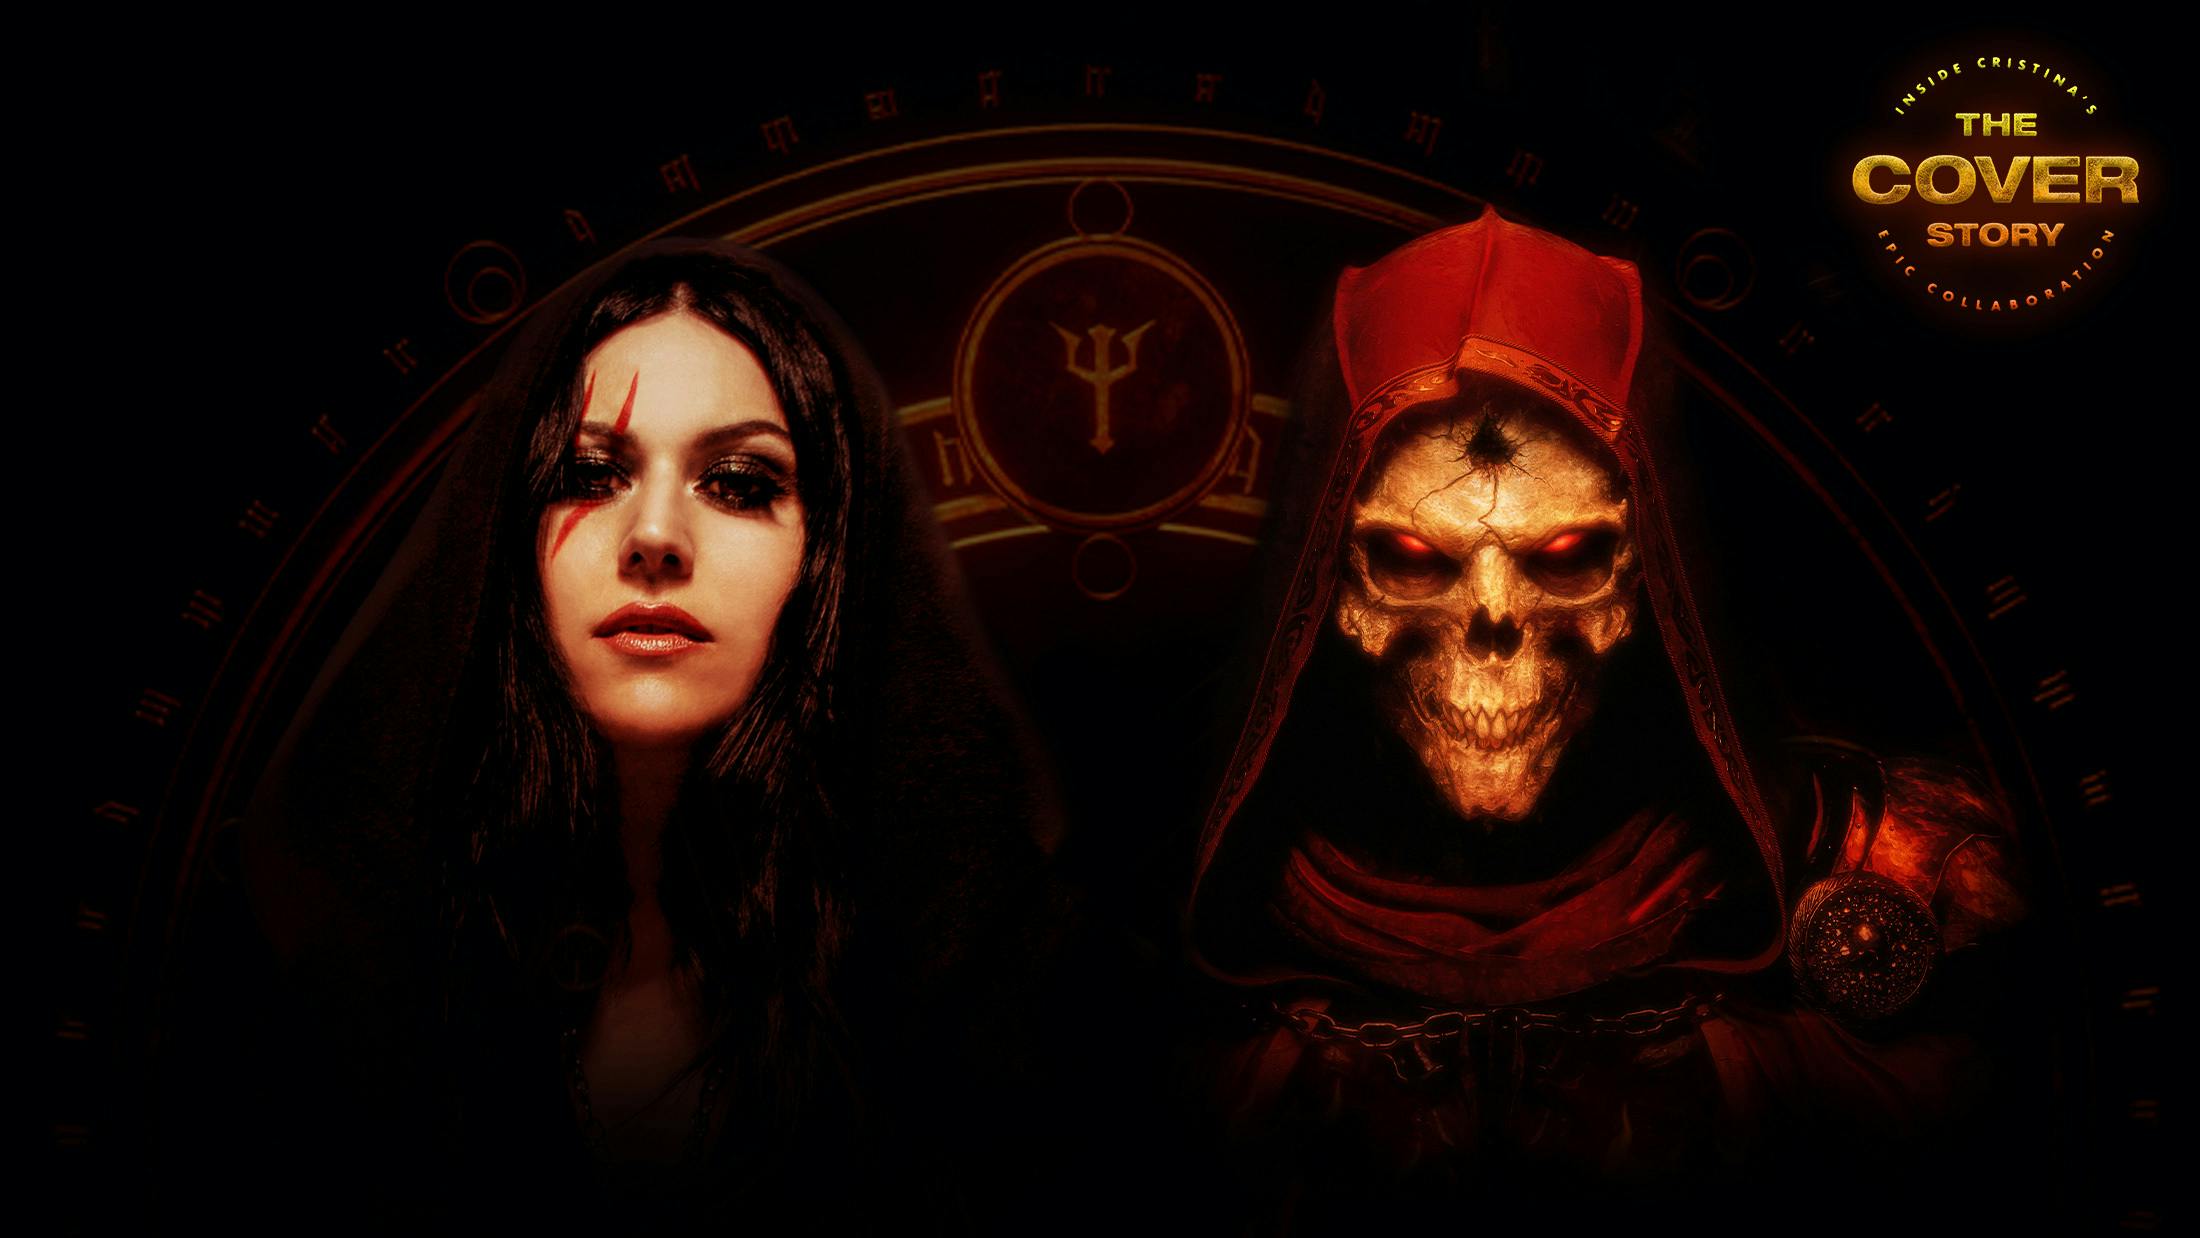 Cristina Scabbia x Diablo: Inside metal and gaming’s most devilish crossover yet